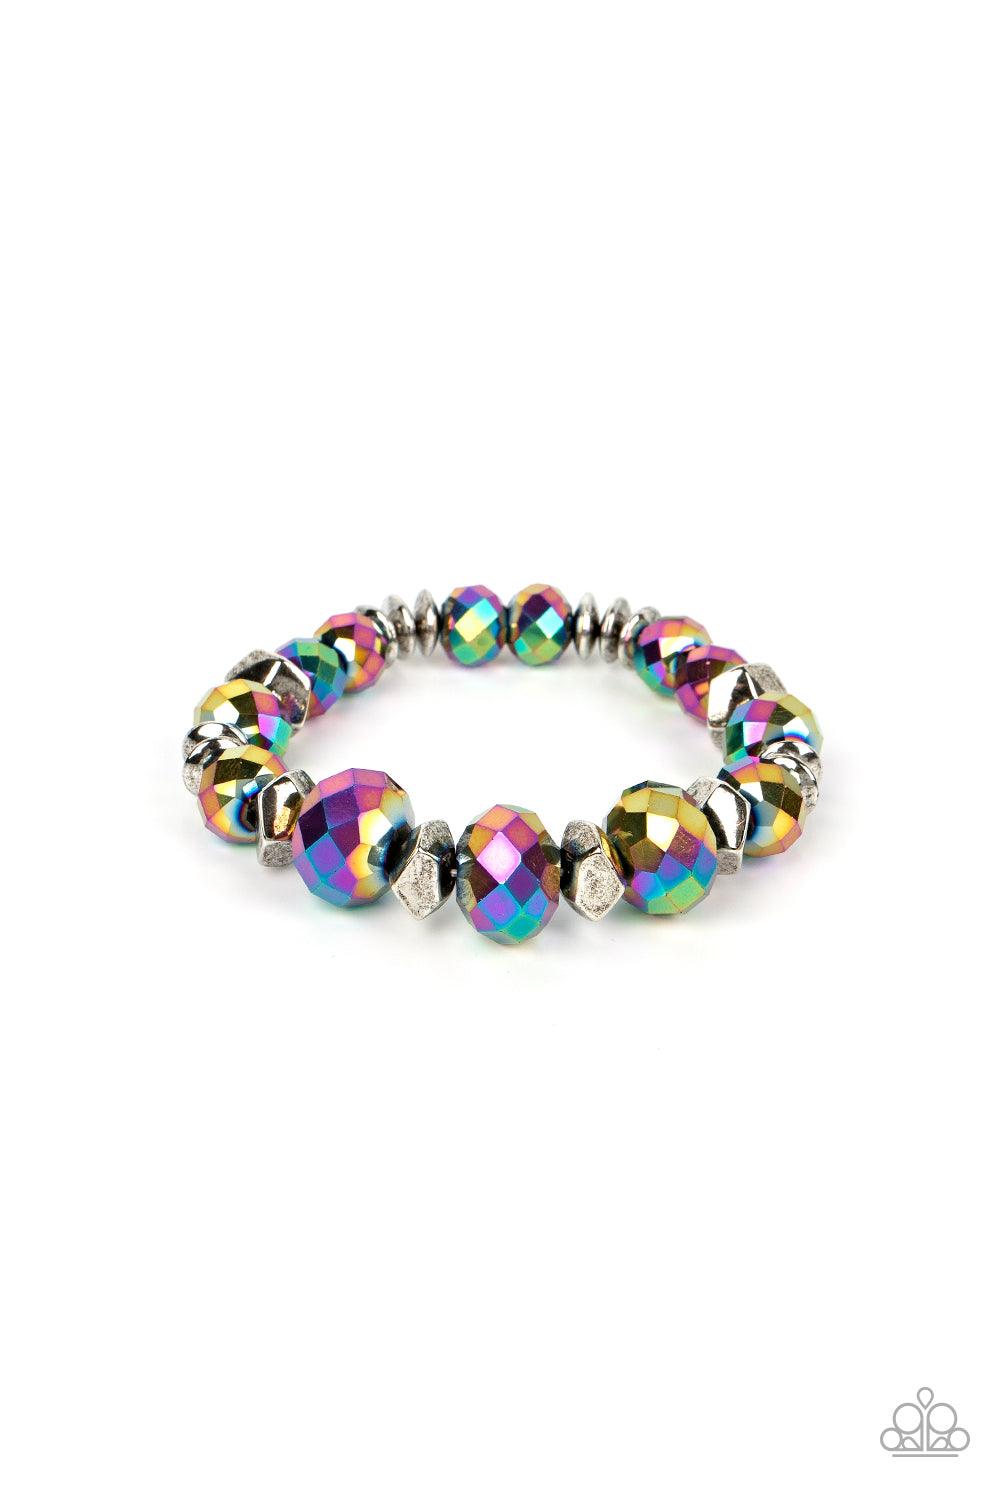 Paparazzi Accessories Astral Auras - Multi Separated by silver discs and faceted silver accents, faceted oil spill crystal-like gems are threaded along stretchy bands around the wrist for a stellar statement. Due to its prismatic palette, color may vary.